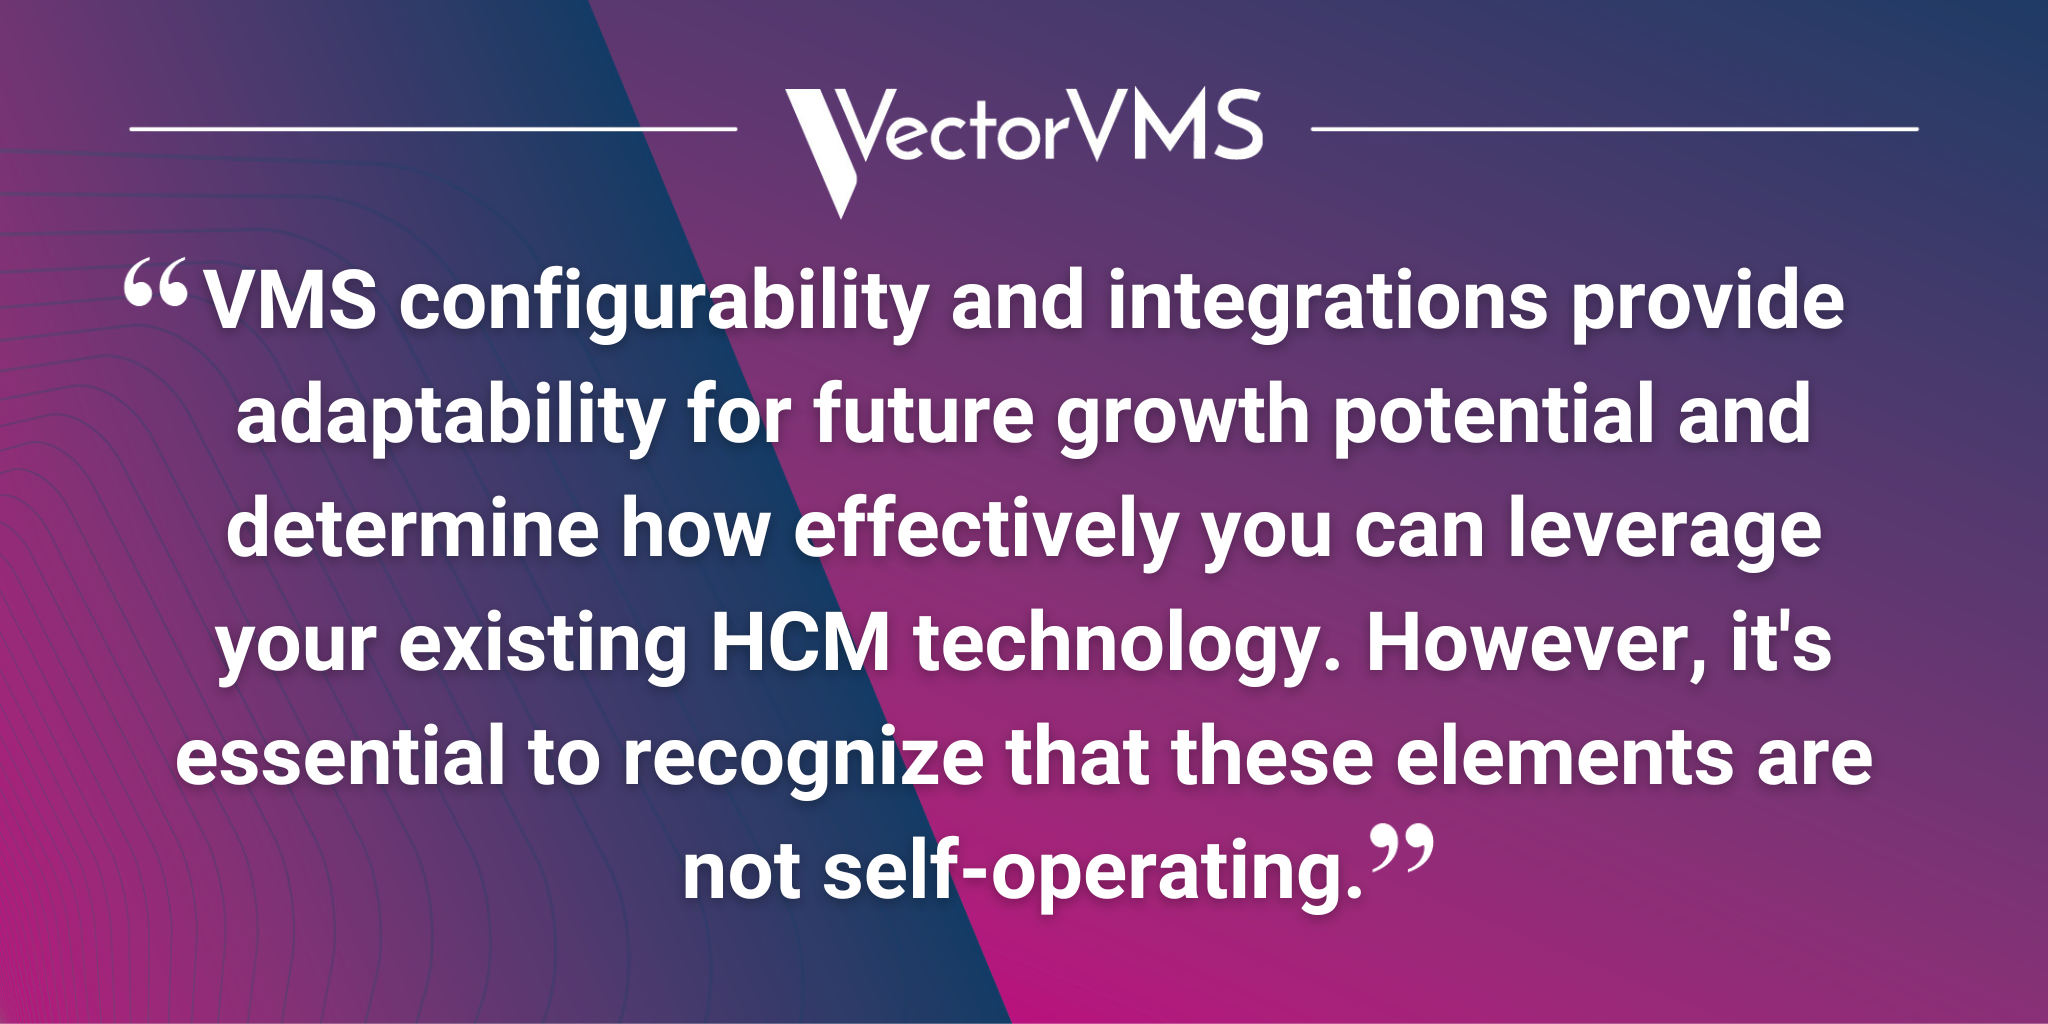 VMS configurability and integrations provide adaptability for future growth potential and determine how effectively you can leverage your existing HCM technology. However, it's essential to recognize that these elements are not self-operating.